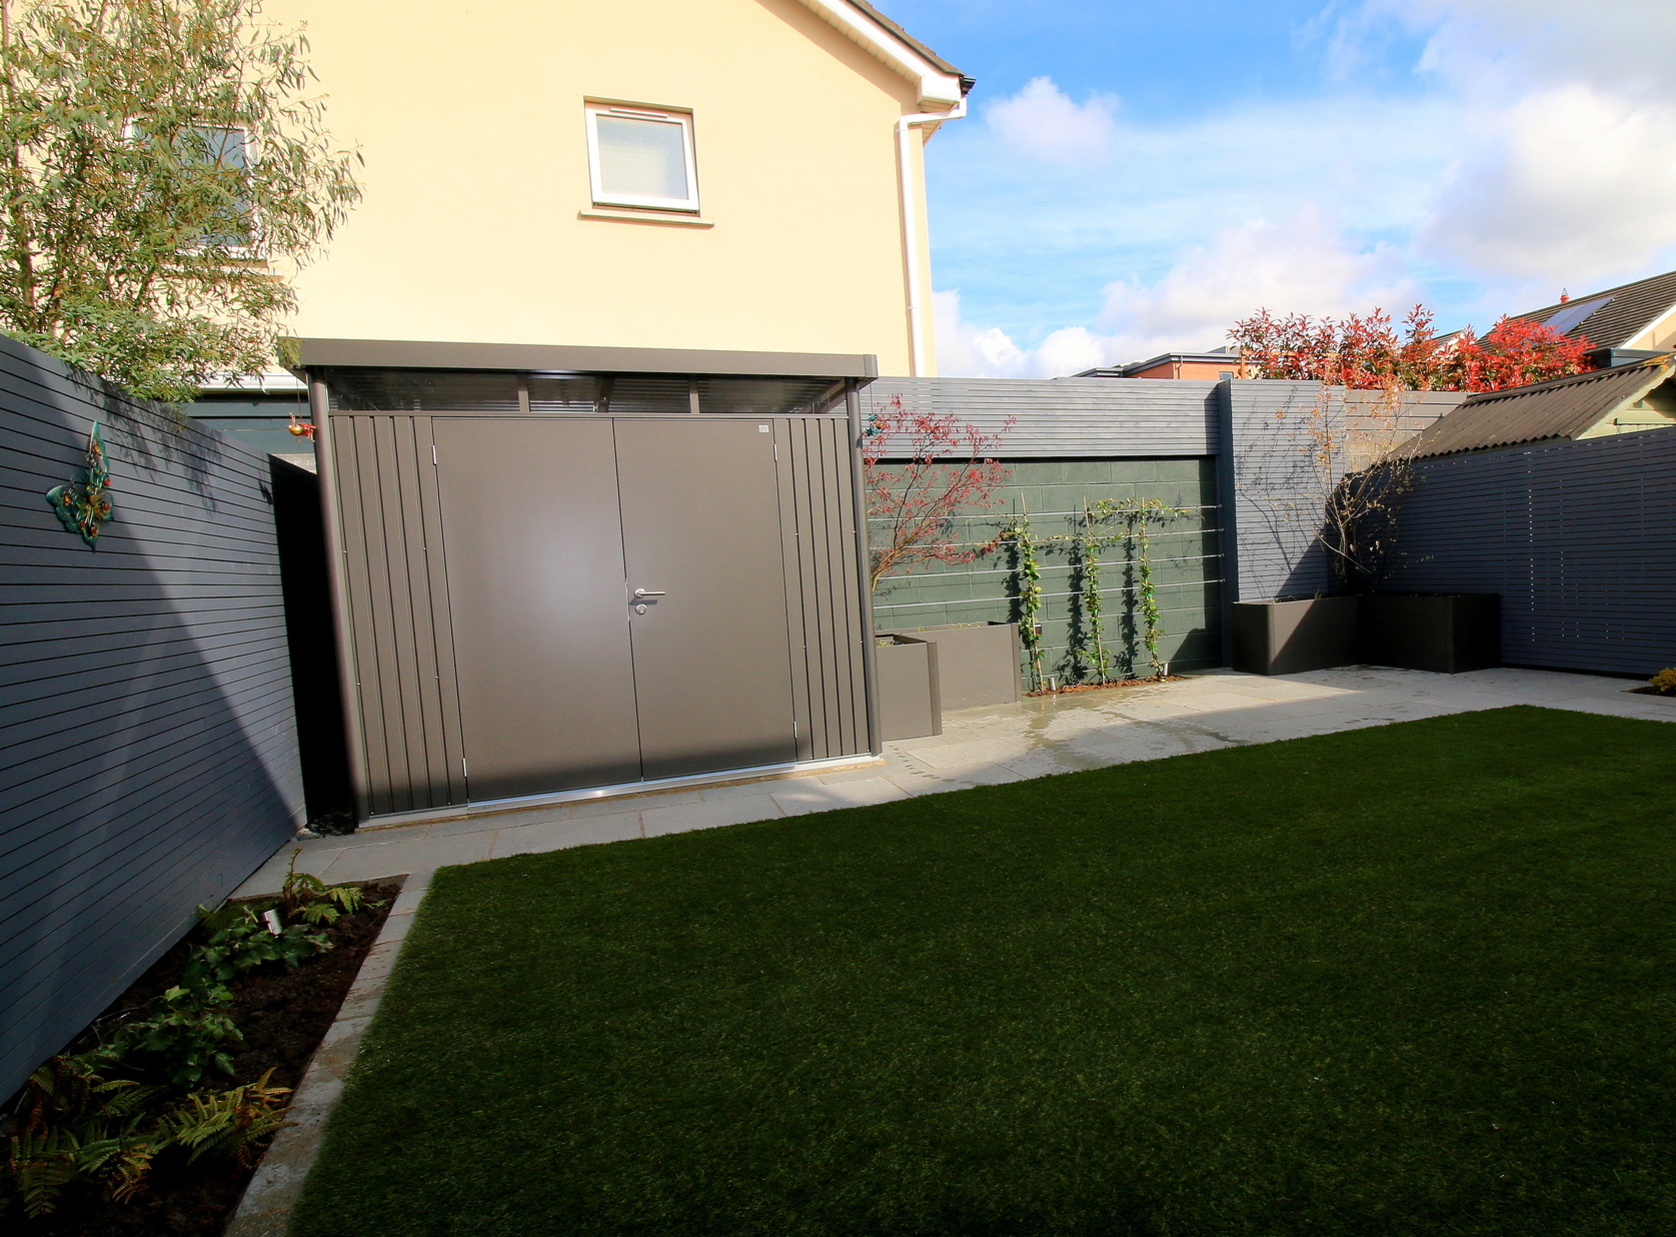 Bespoke Horizontal Timber Slat Fencing  with painted finish | Supplied + Fitted in Castleknock, Dublin 15 by Owen Chubb Landscapers, Tel 087-2306 128.